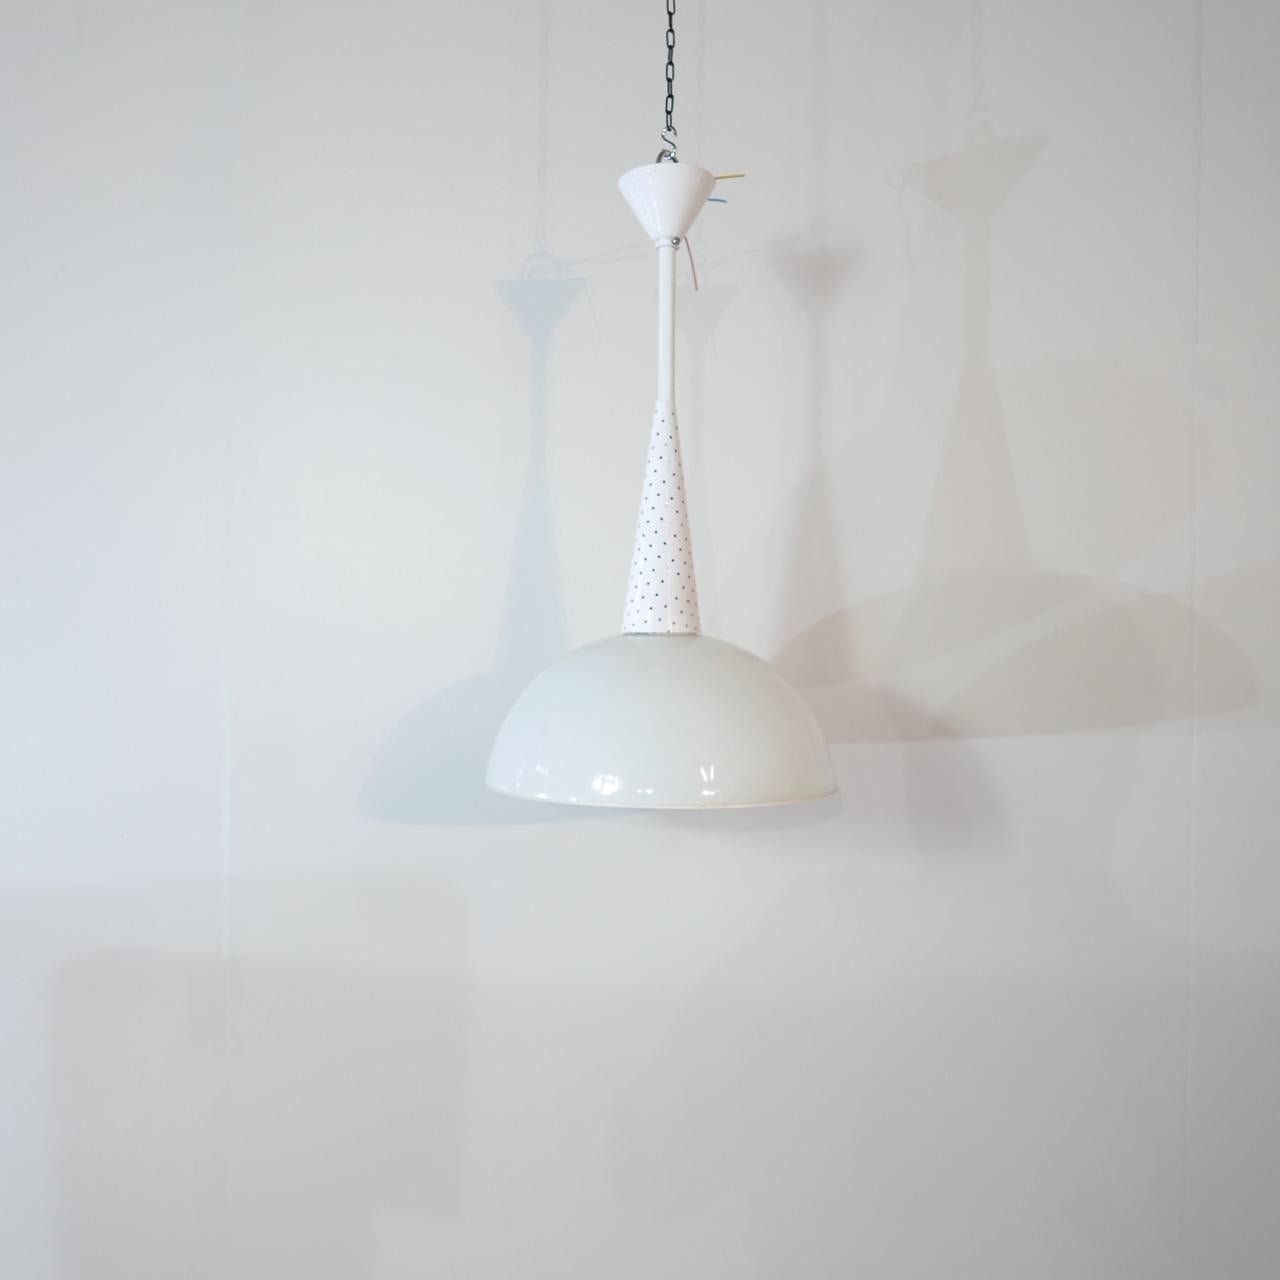 French Midcentury Pendant Lights by Mathieu Matégot for Holophane For Sale 2